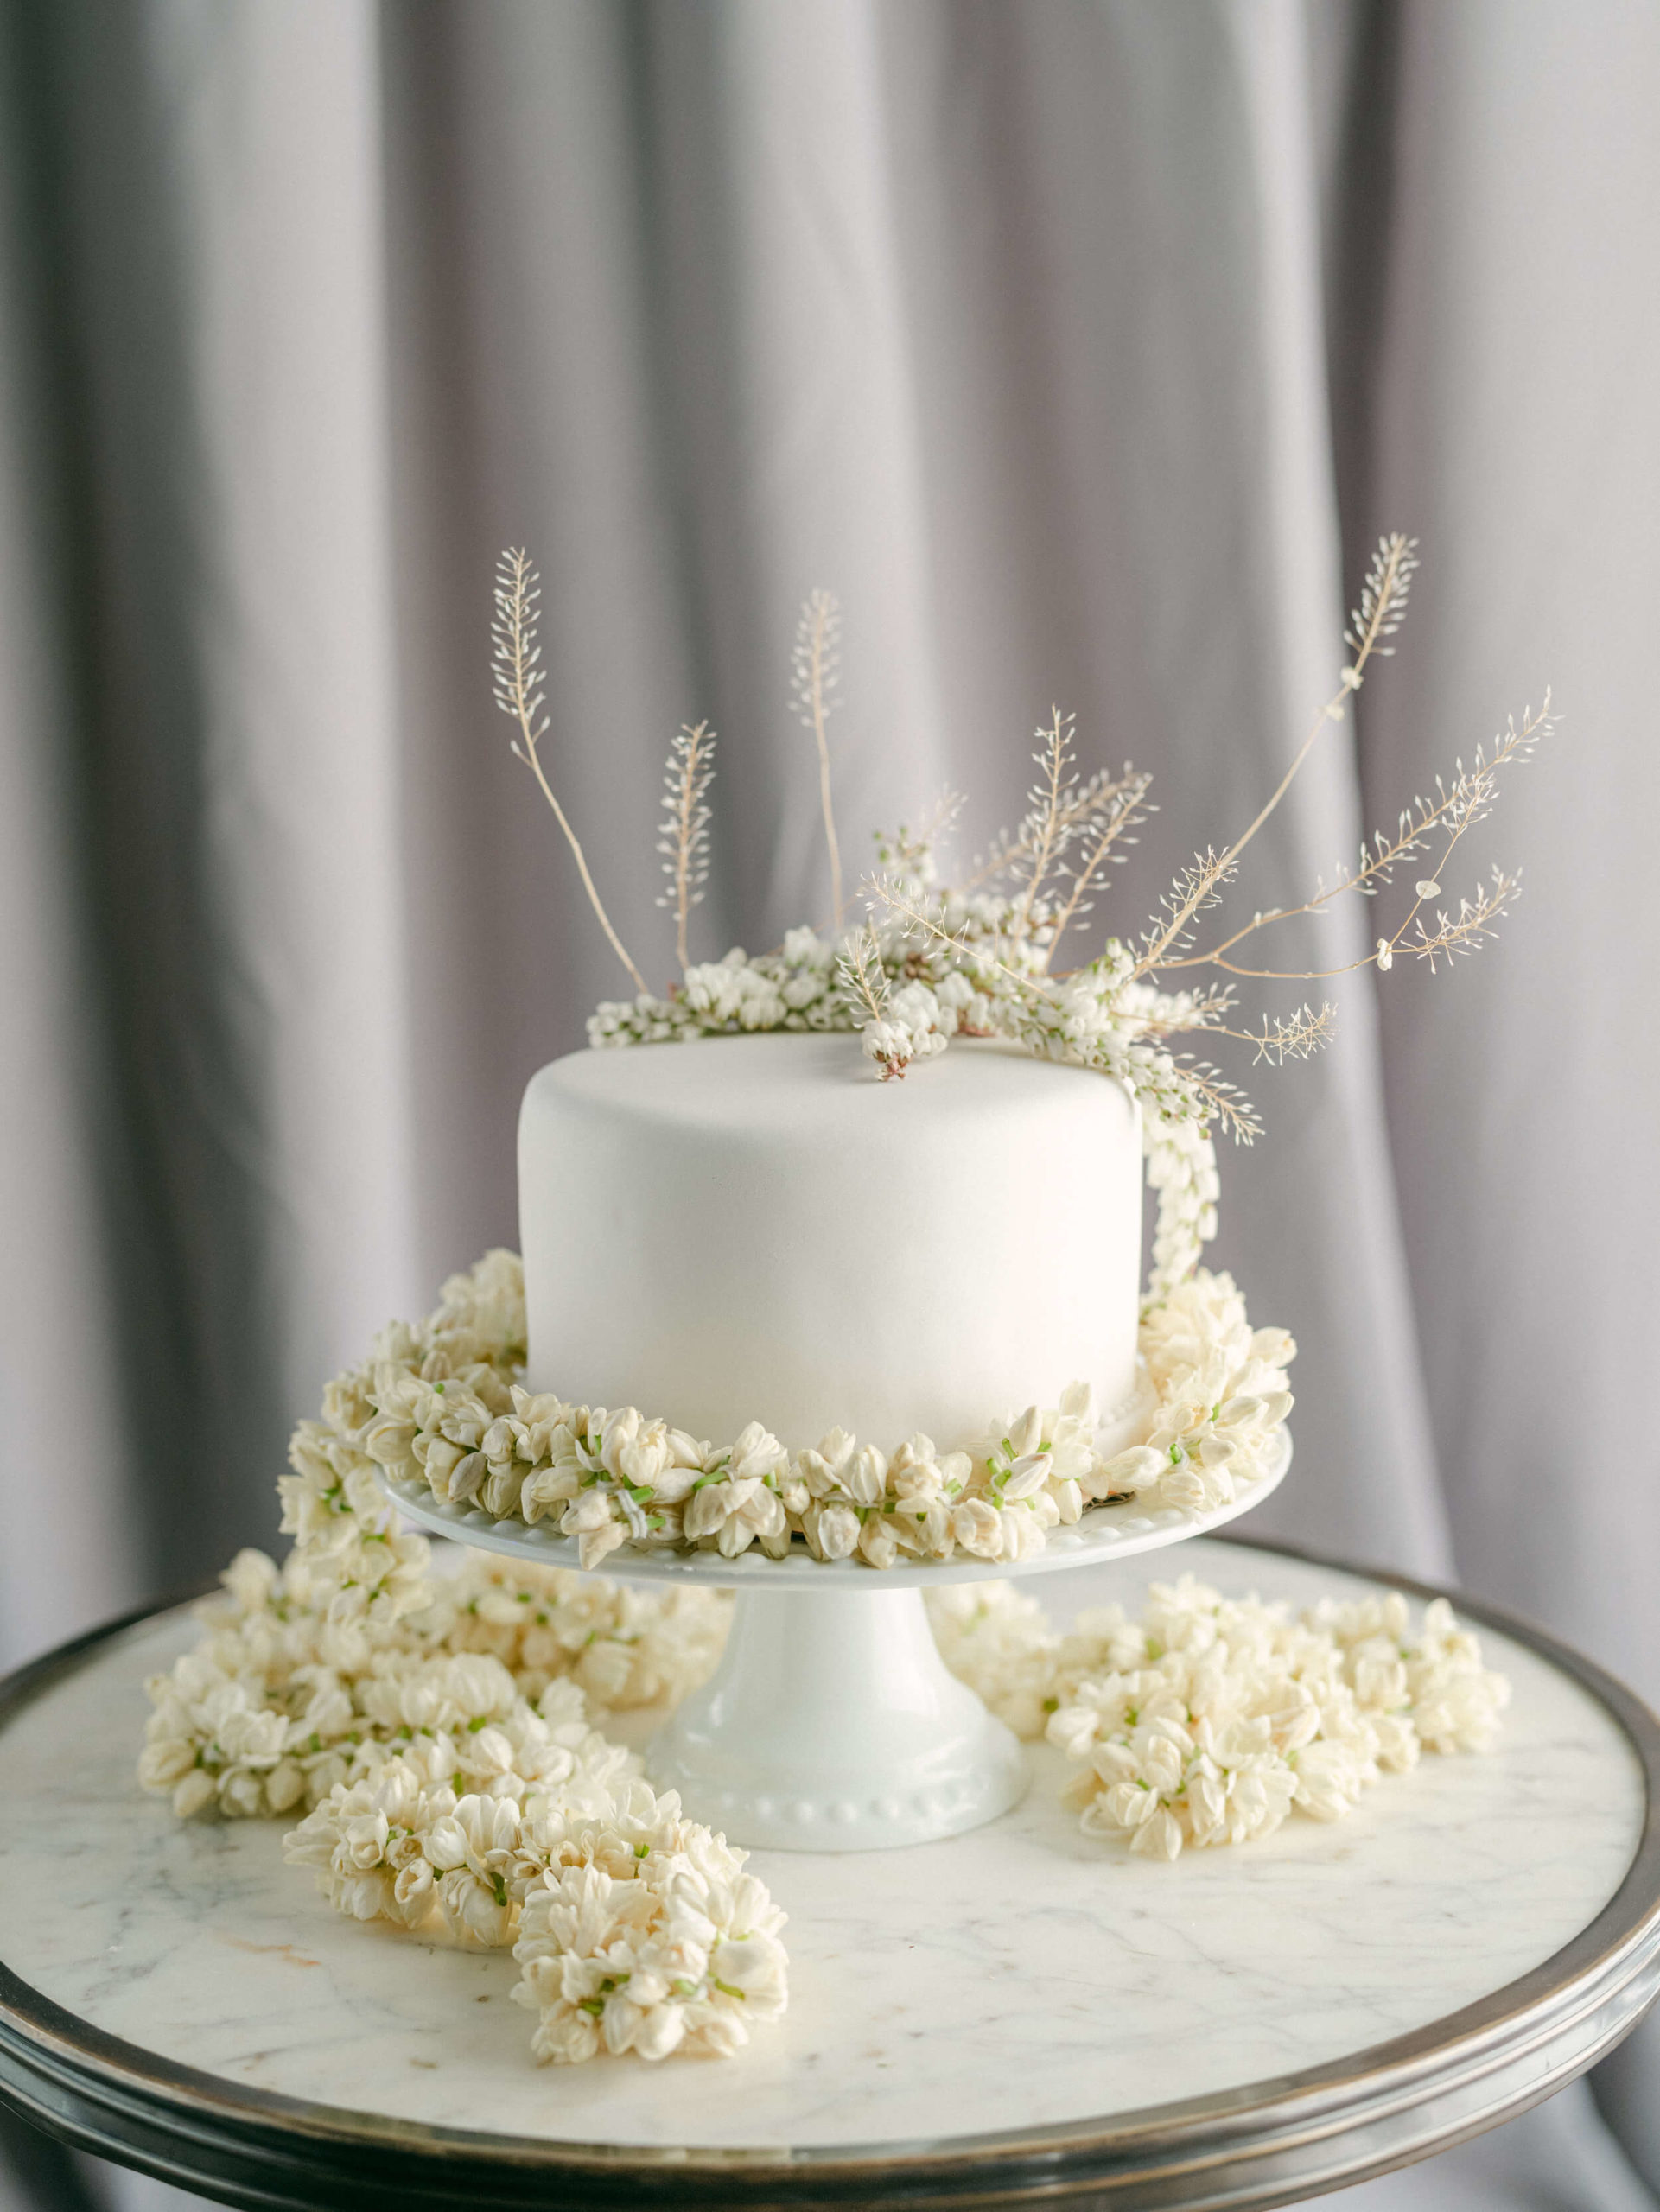 Wedding cake with baby's breath and white florals